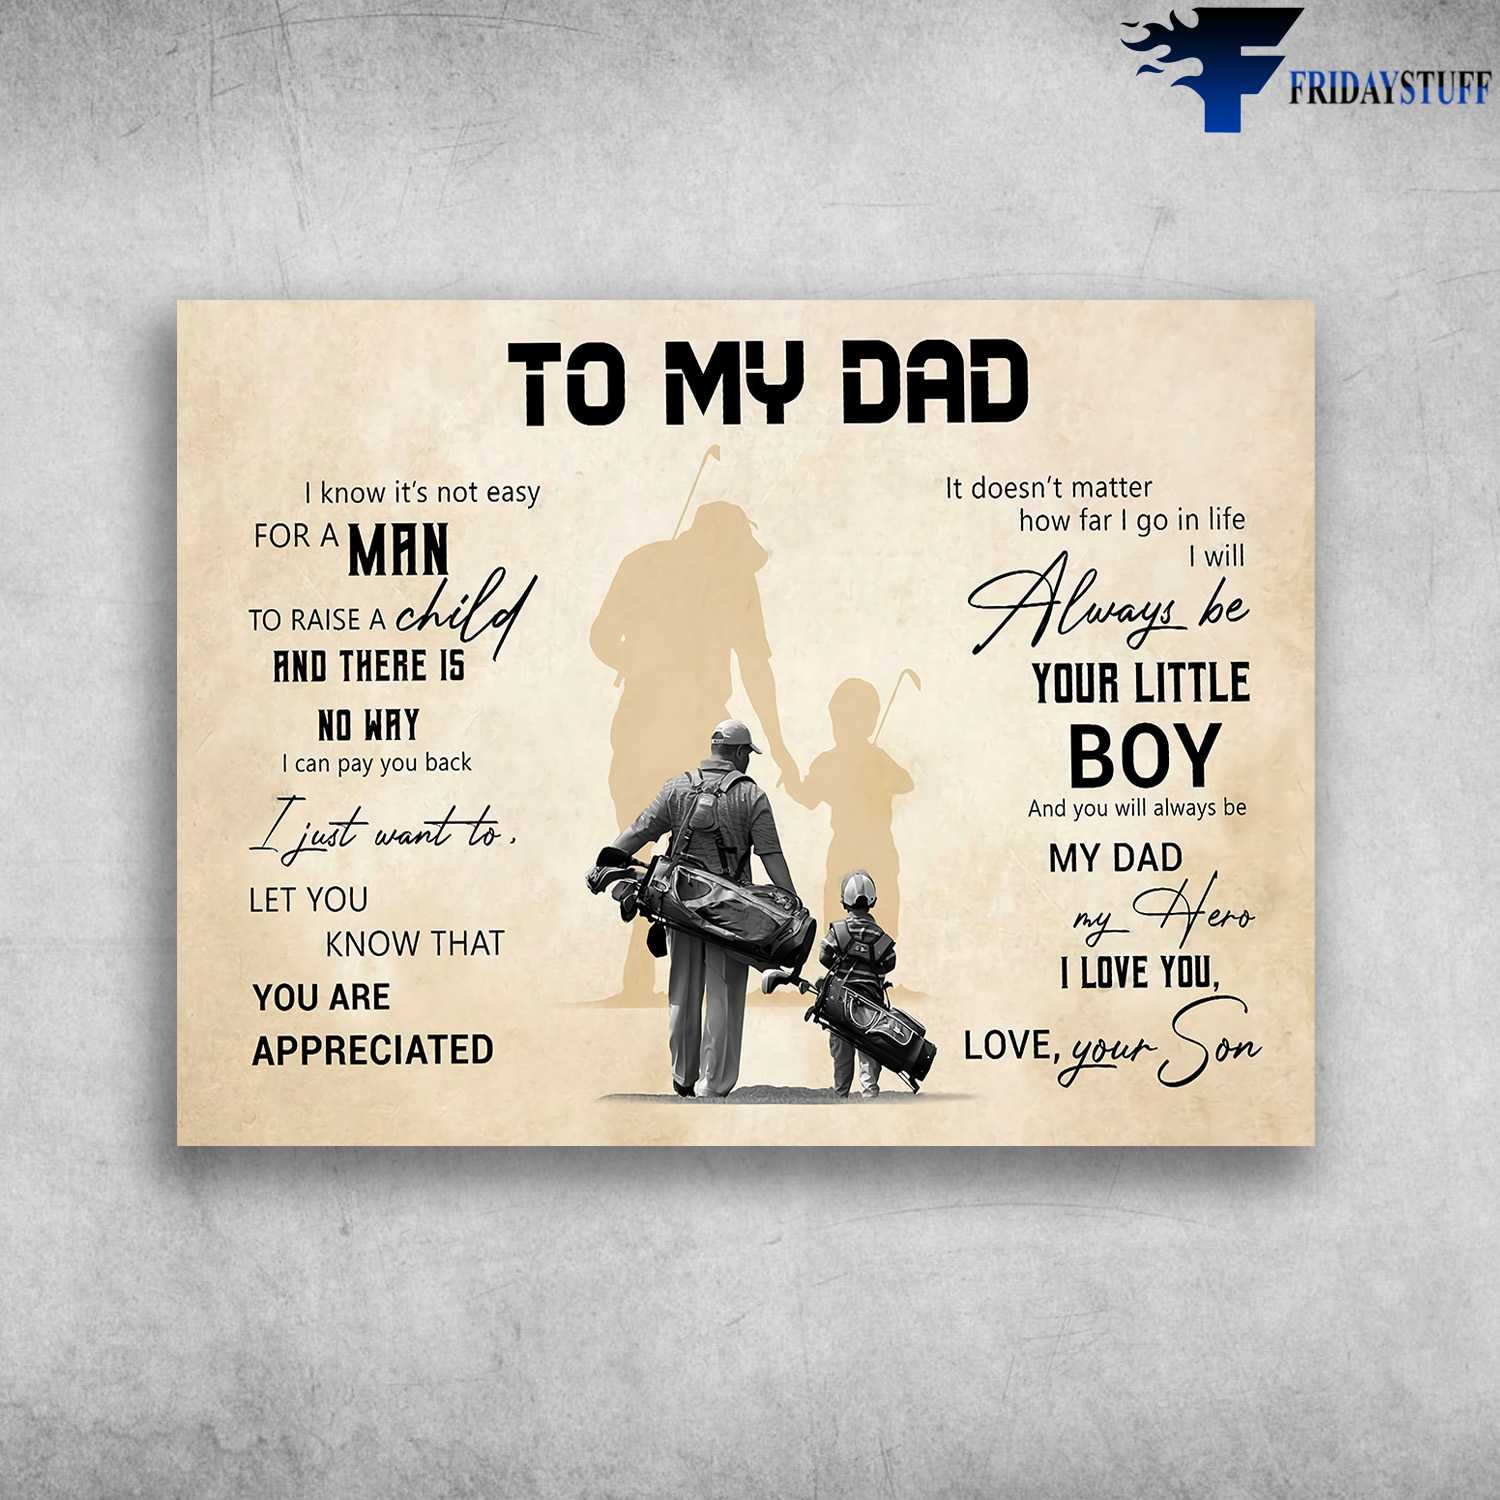 Dad And Son, Golf Lover - To My Dad, I Know It's Not Easy For A Man, To Raise A Child, And There Is No Way, I Can Pay You Back, I Just Want To Let You Know That, You Are Appreciated